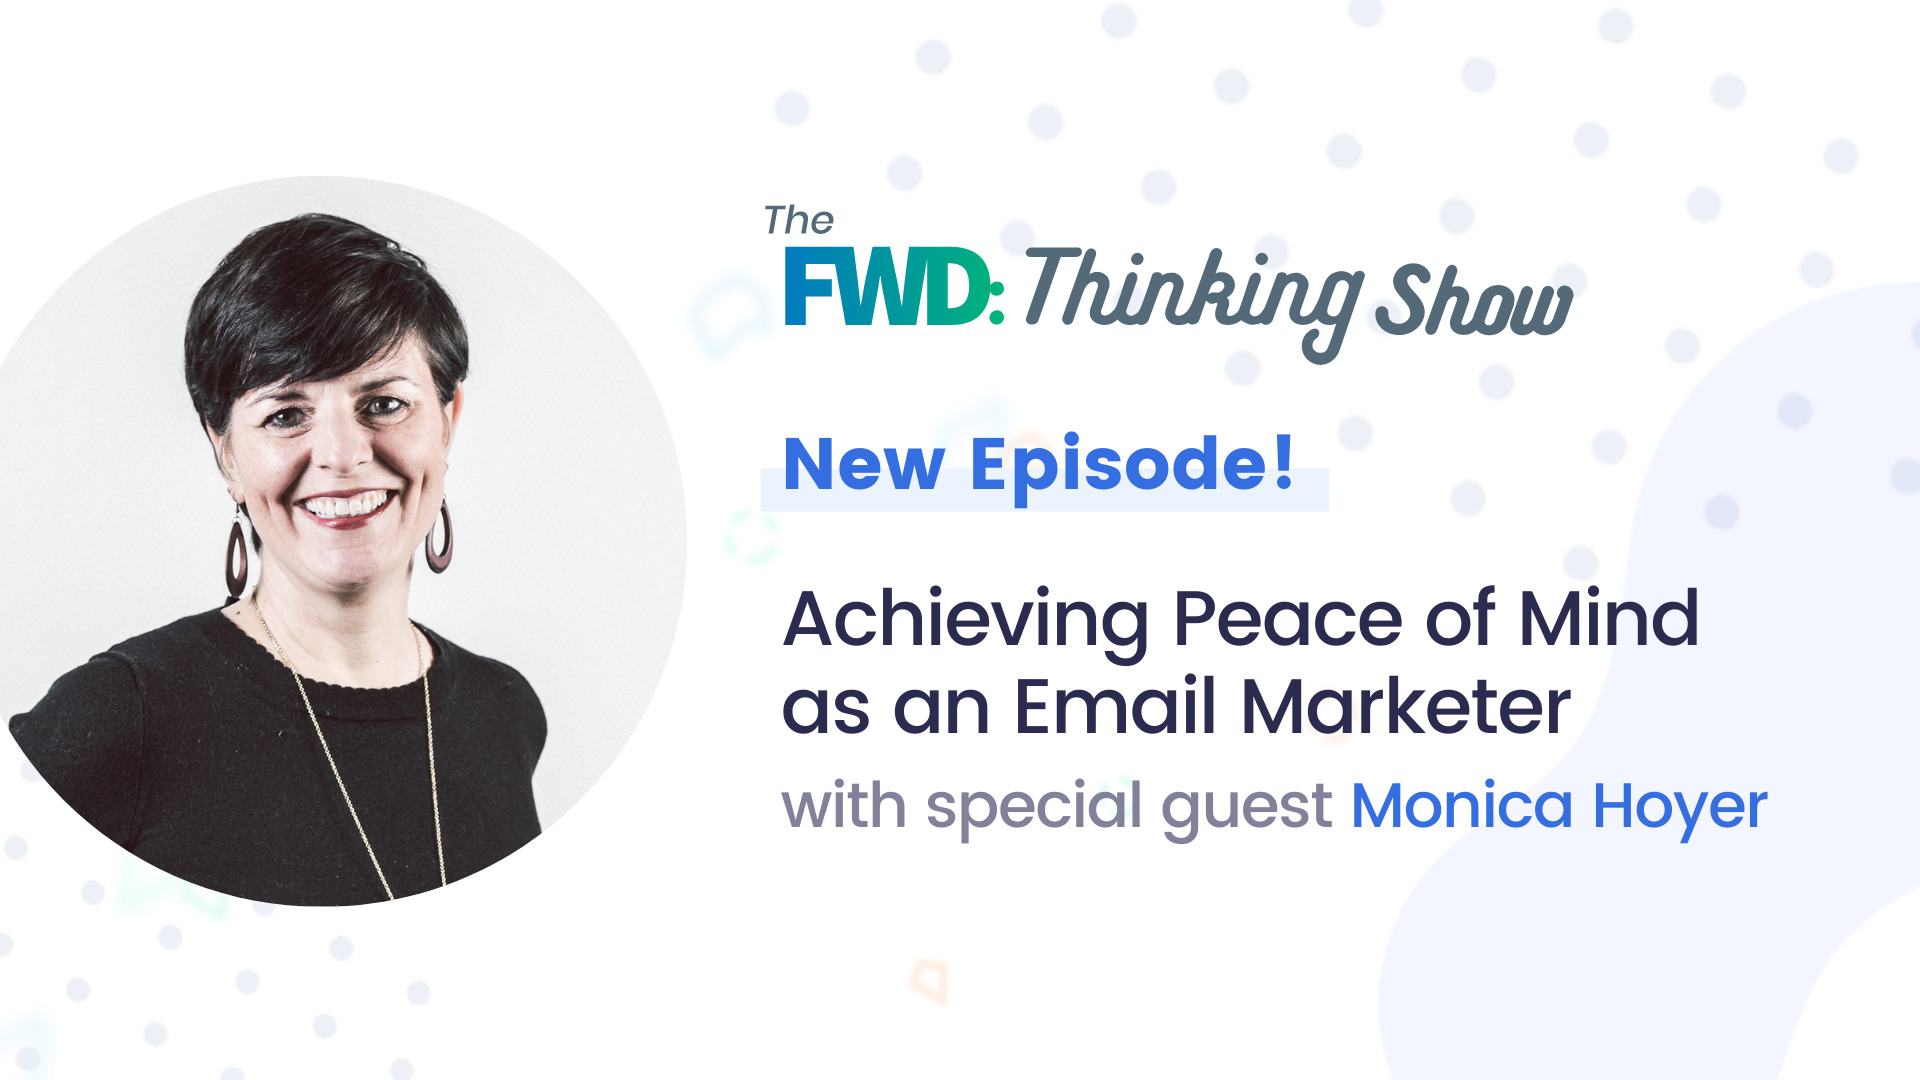 Achieving Peace of Mind as an Email Marketer with Monica Hoyer